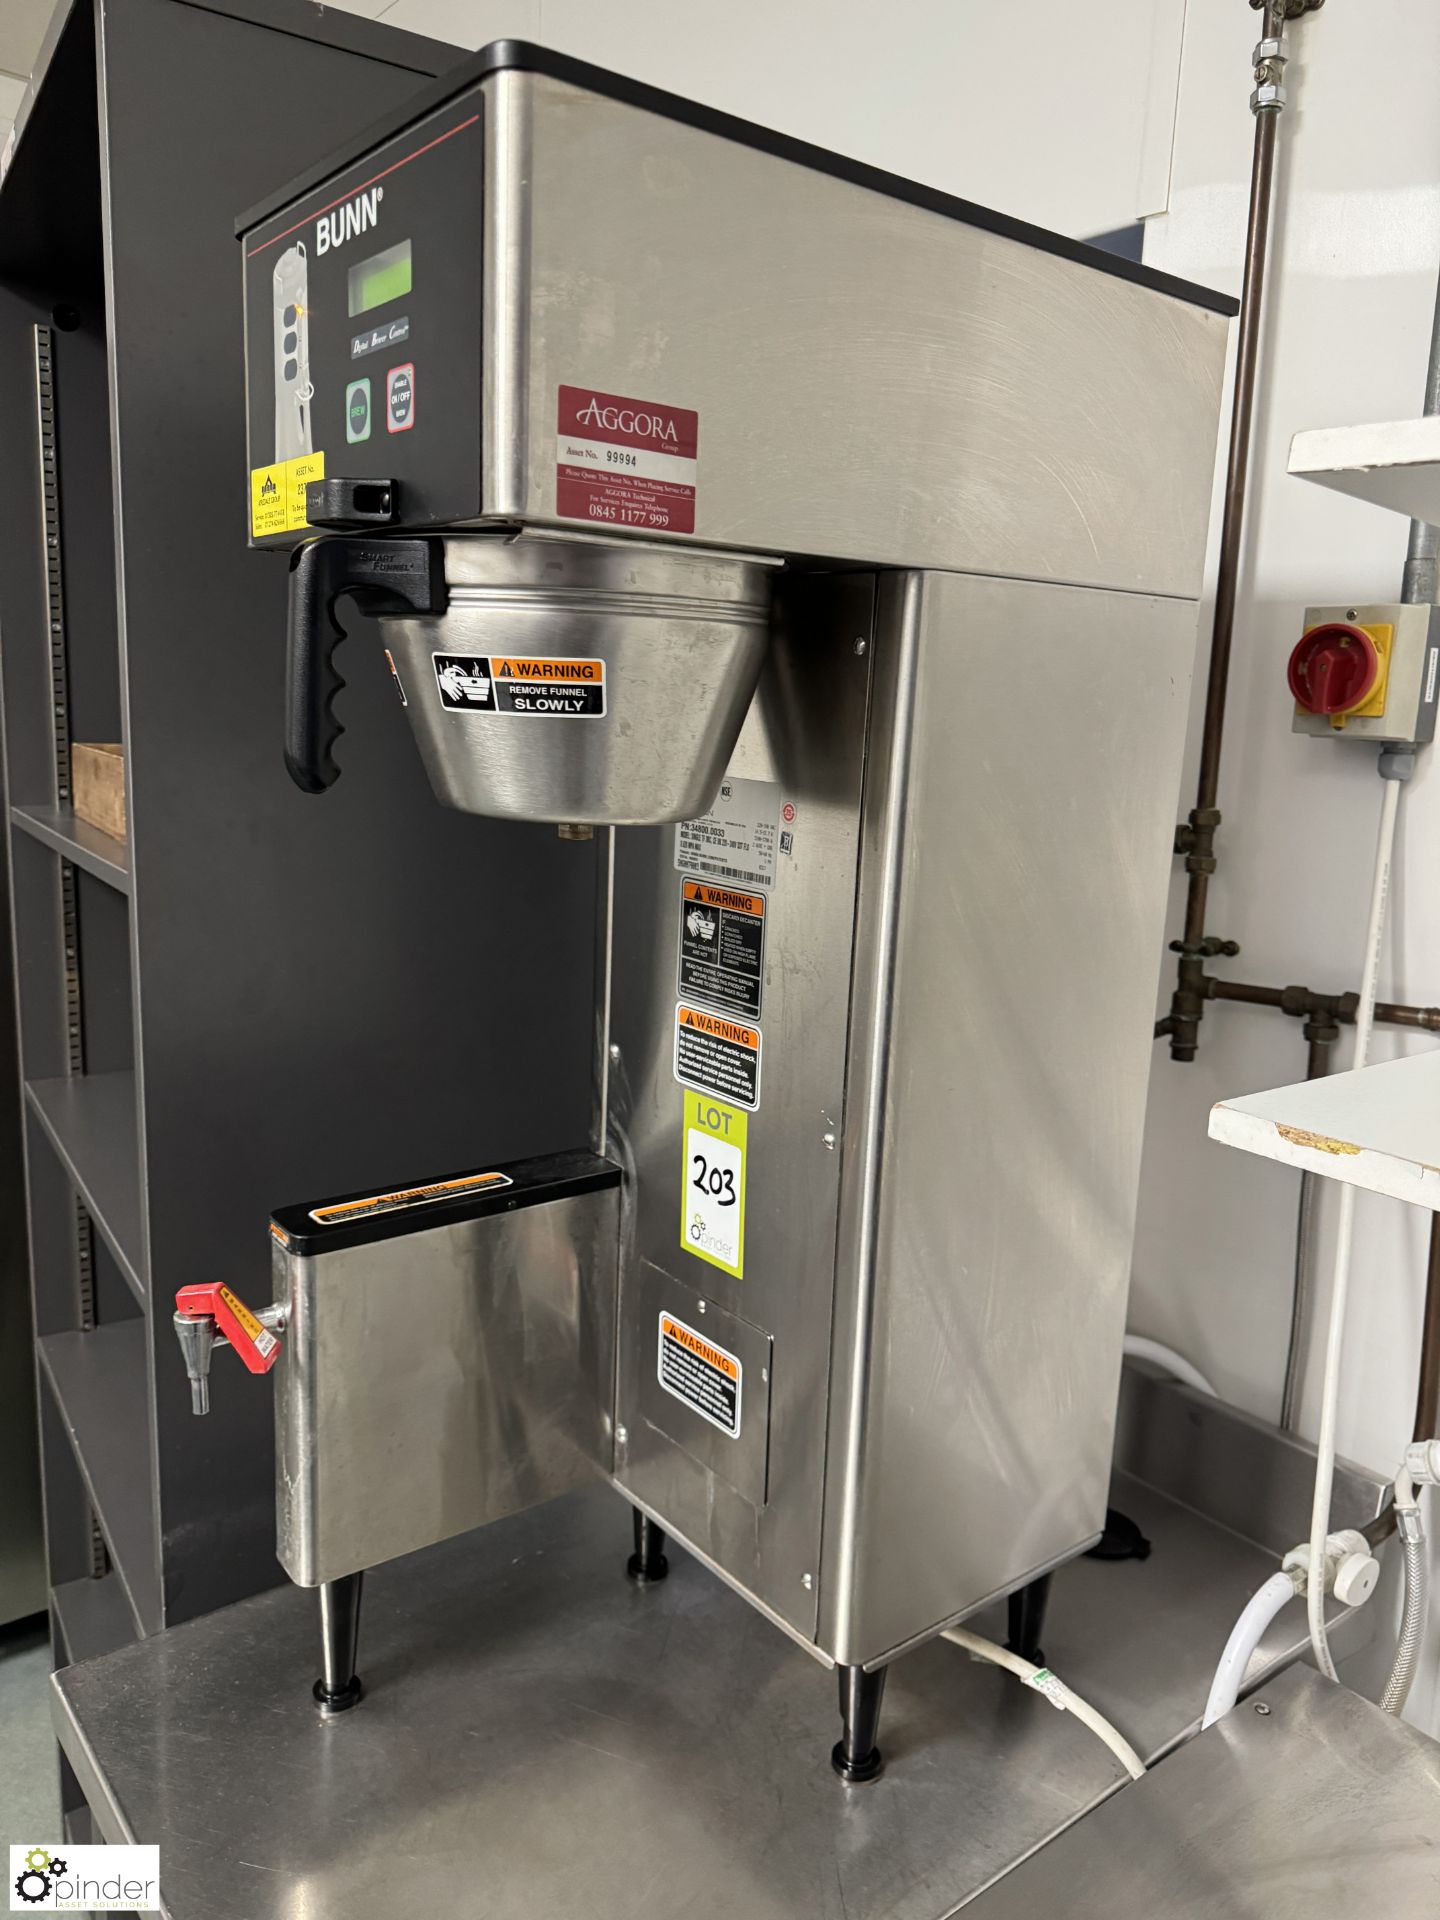 Bunn single TF DBC Coffee Brewer, 240volts (location in building - level 23 kitchen) - Image 4 of 5